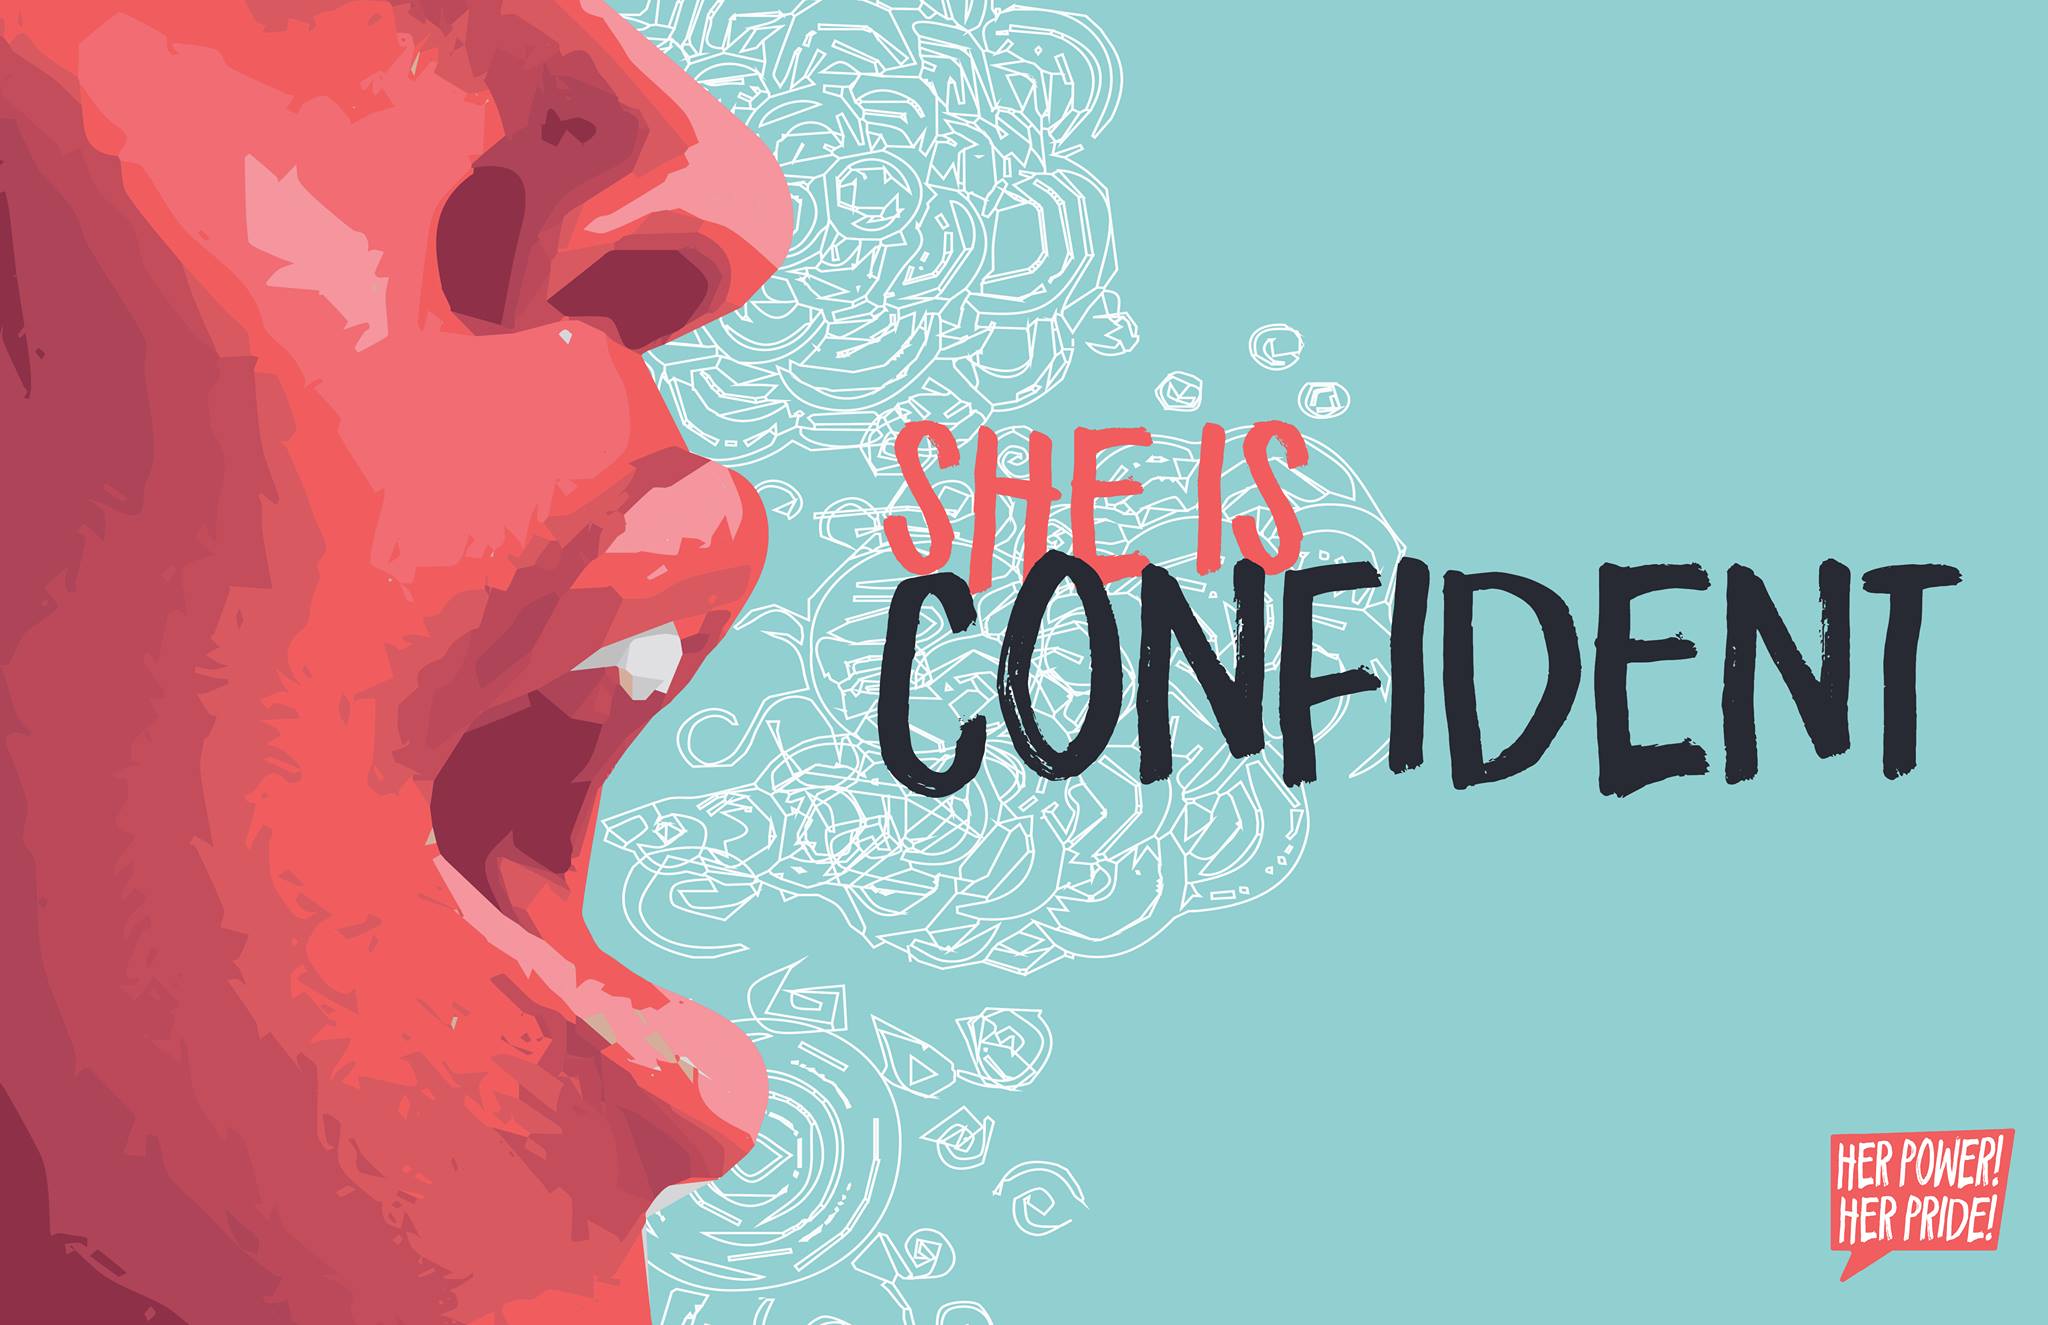 drawing of a side profile of a face with their mouth open. The text says "She is Confident" with the Her Power! Her Pride! logo in the corner